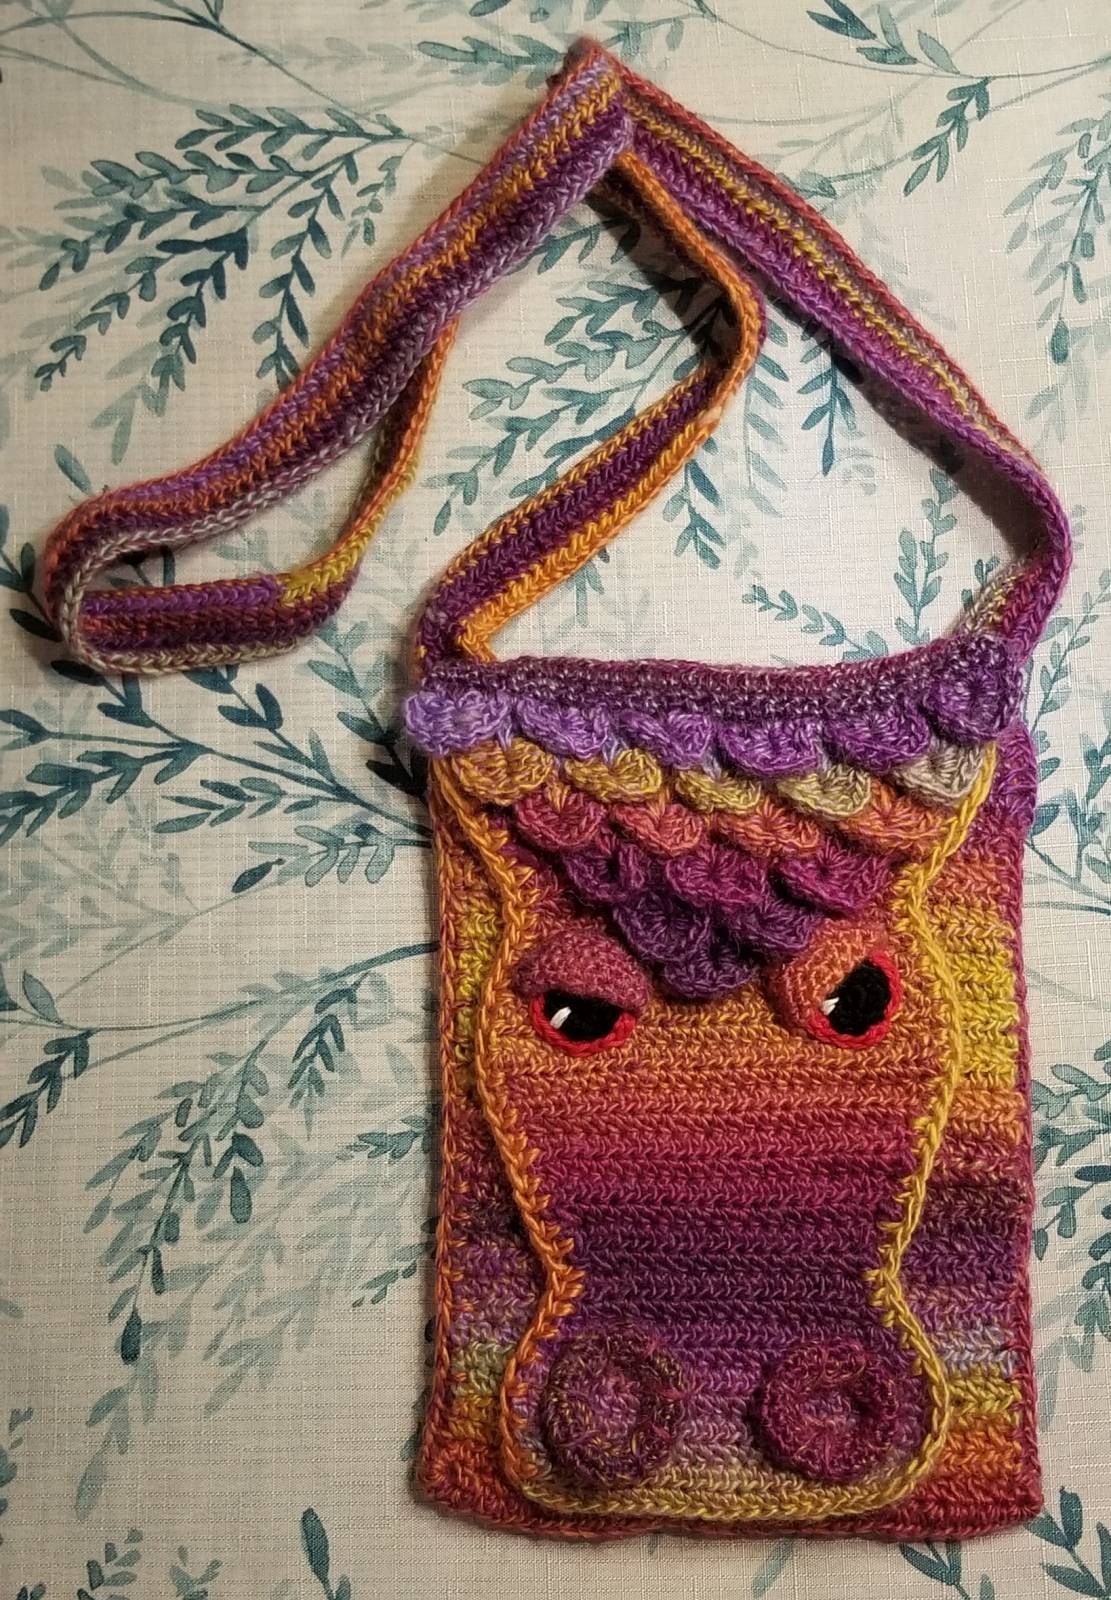 Dragon Crochet Amigurumi Purse Pattern Review by Shelby LaMothe for Cottontail and Whiskers